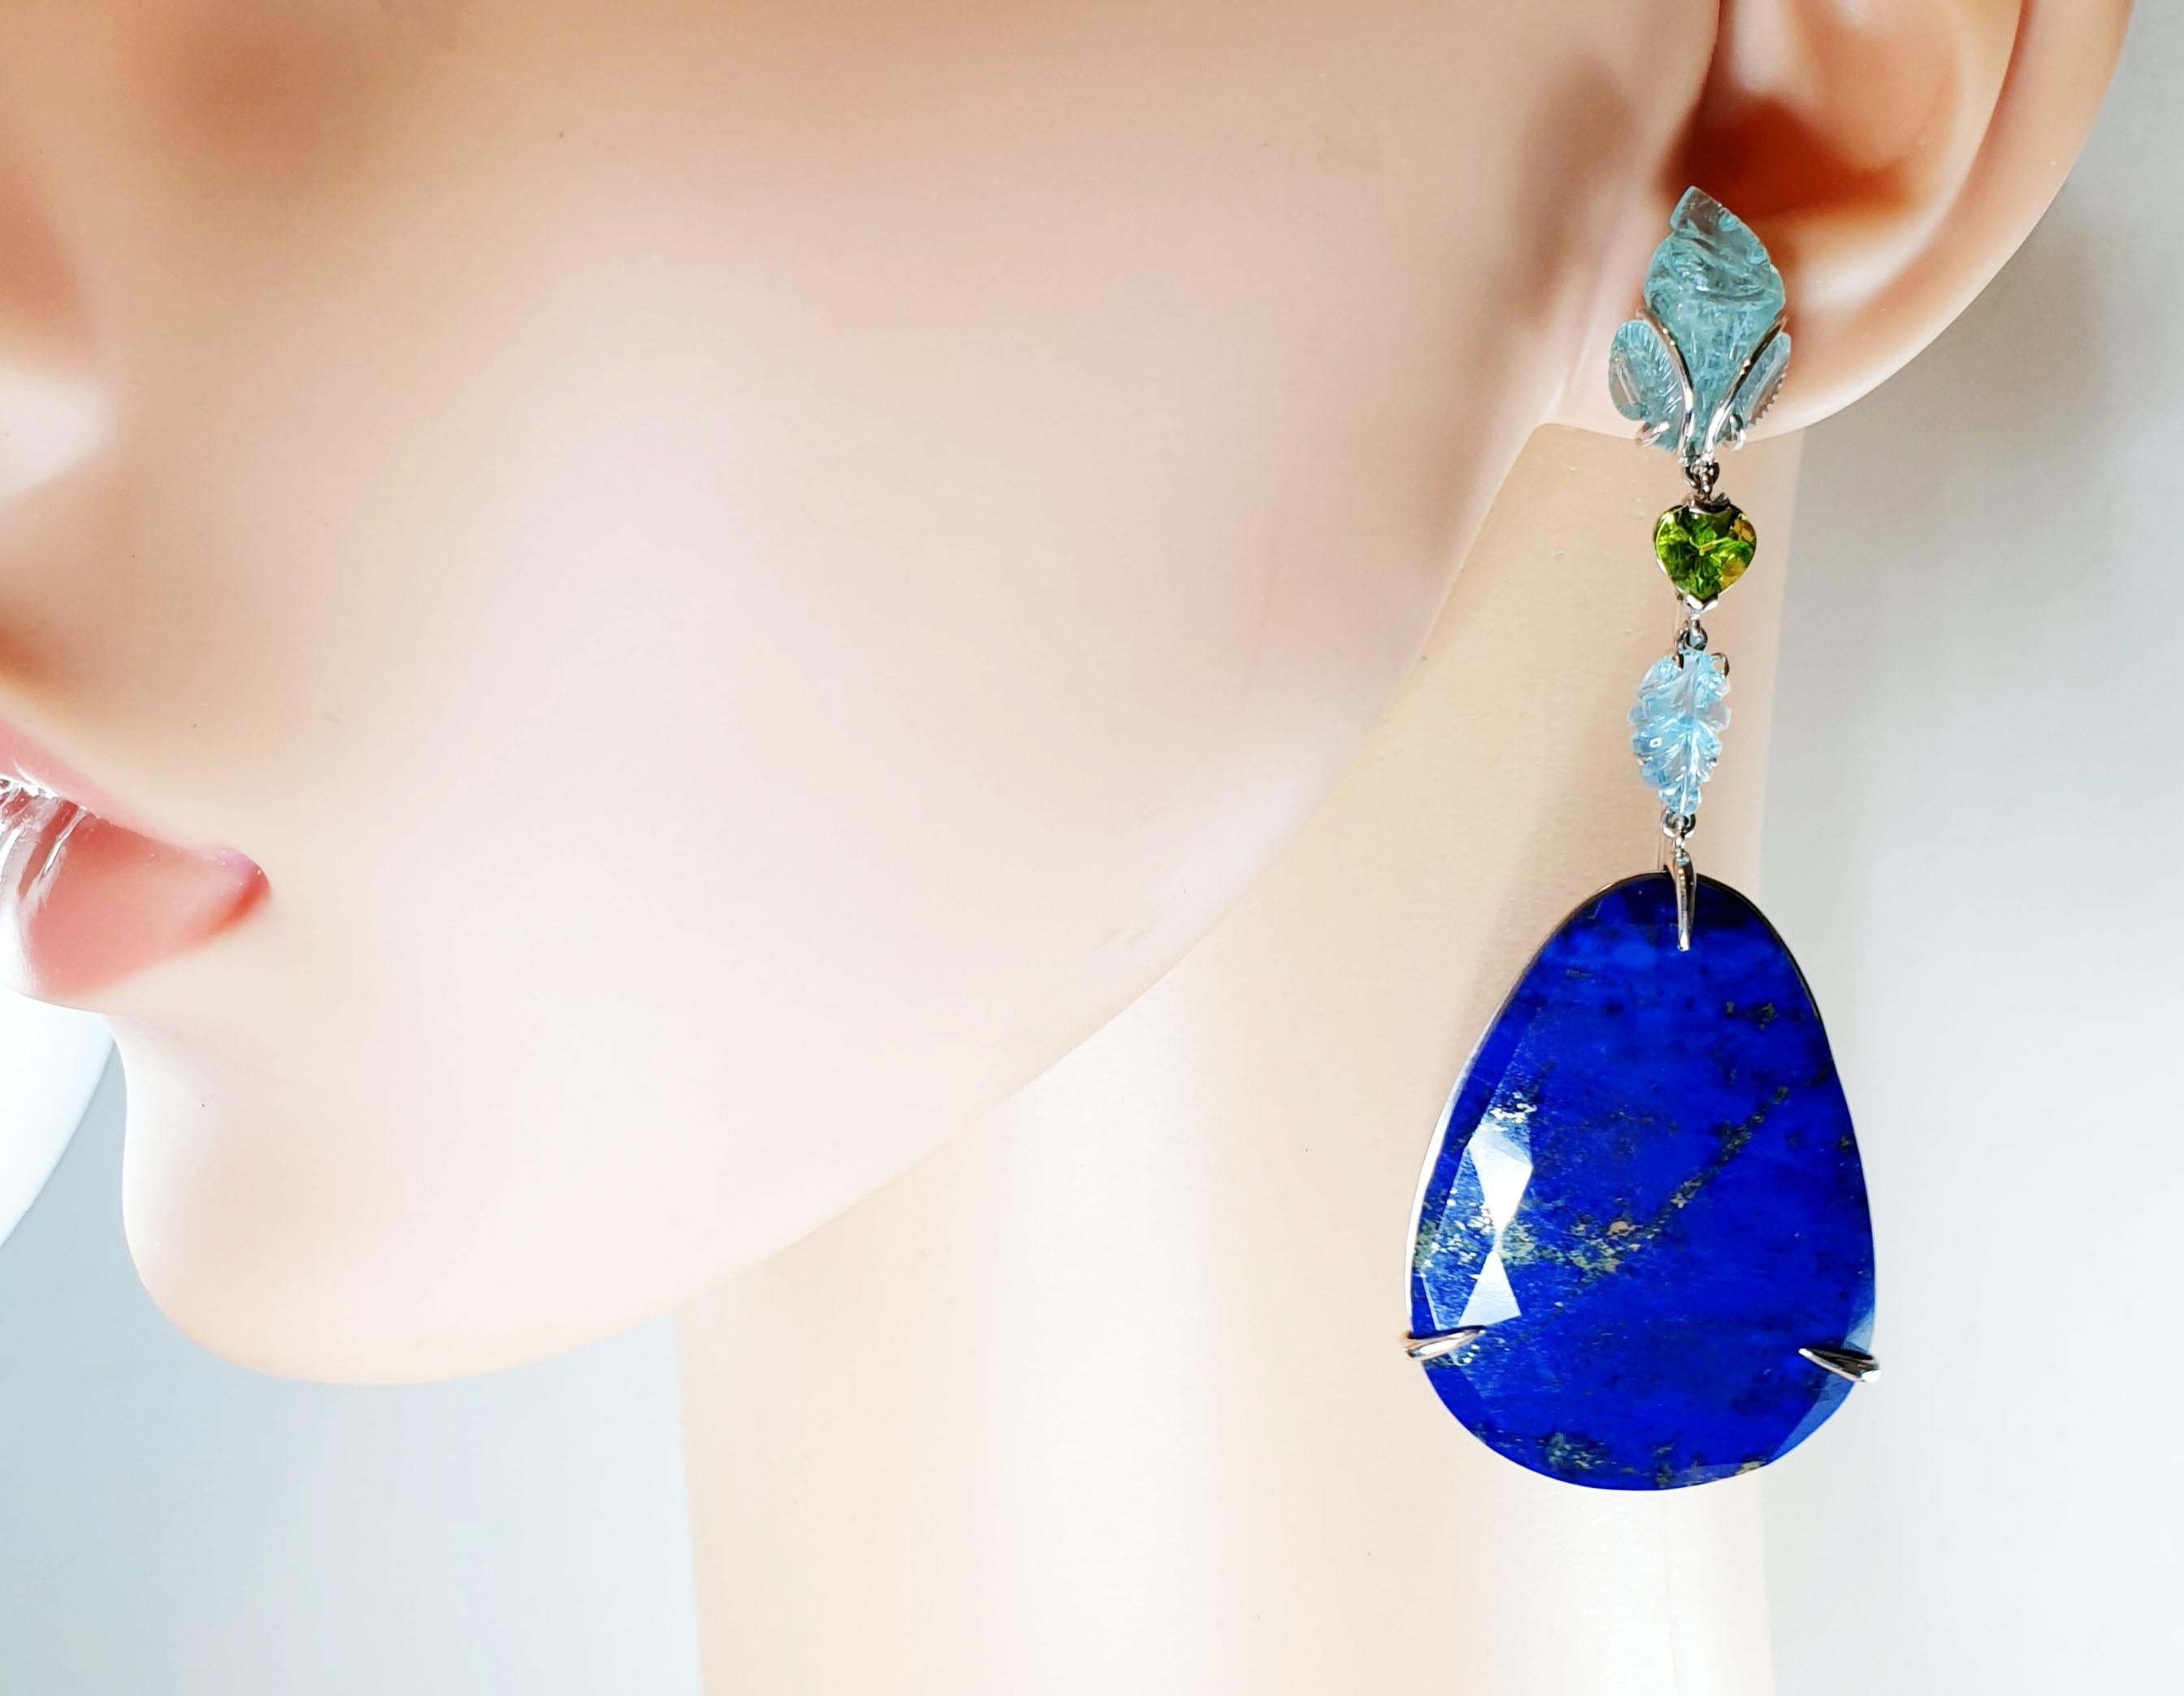 Carved Leafs Aquamarines Peridot in 18k Gold Earrings with Lapis Lazuli Drops For Sale 1